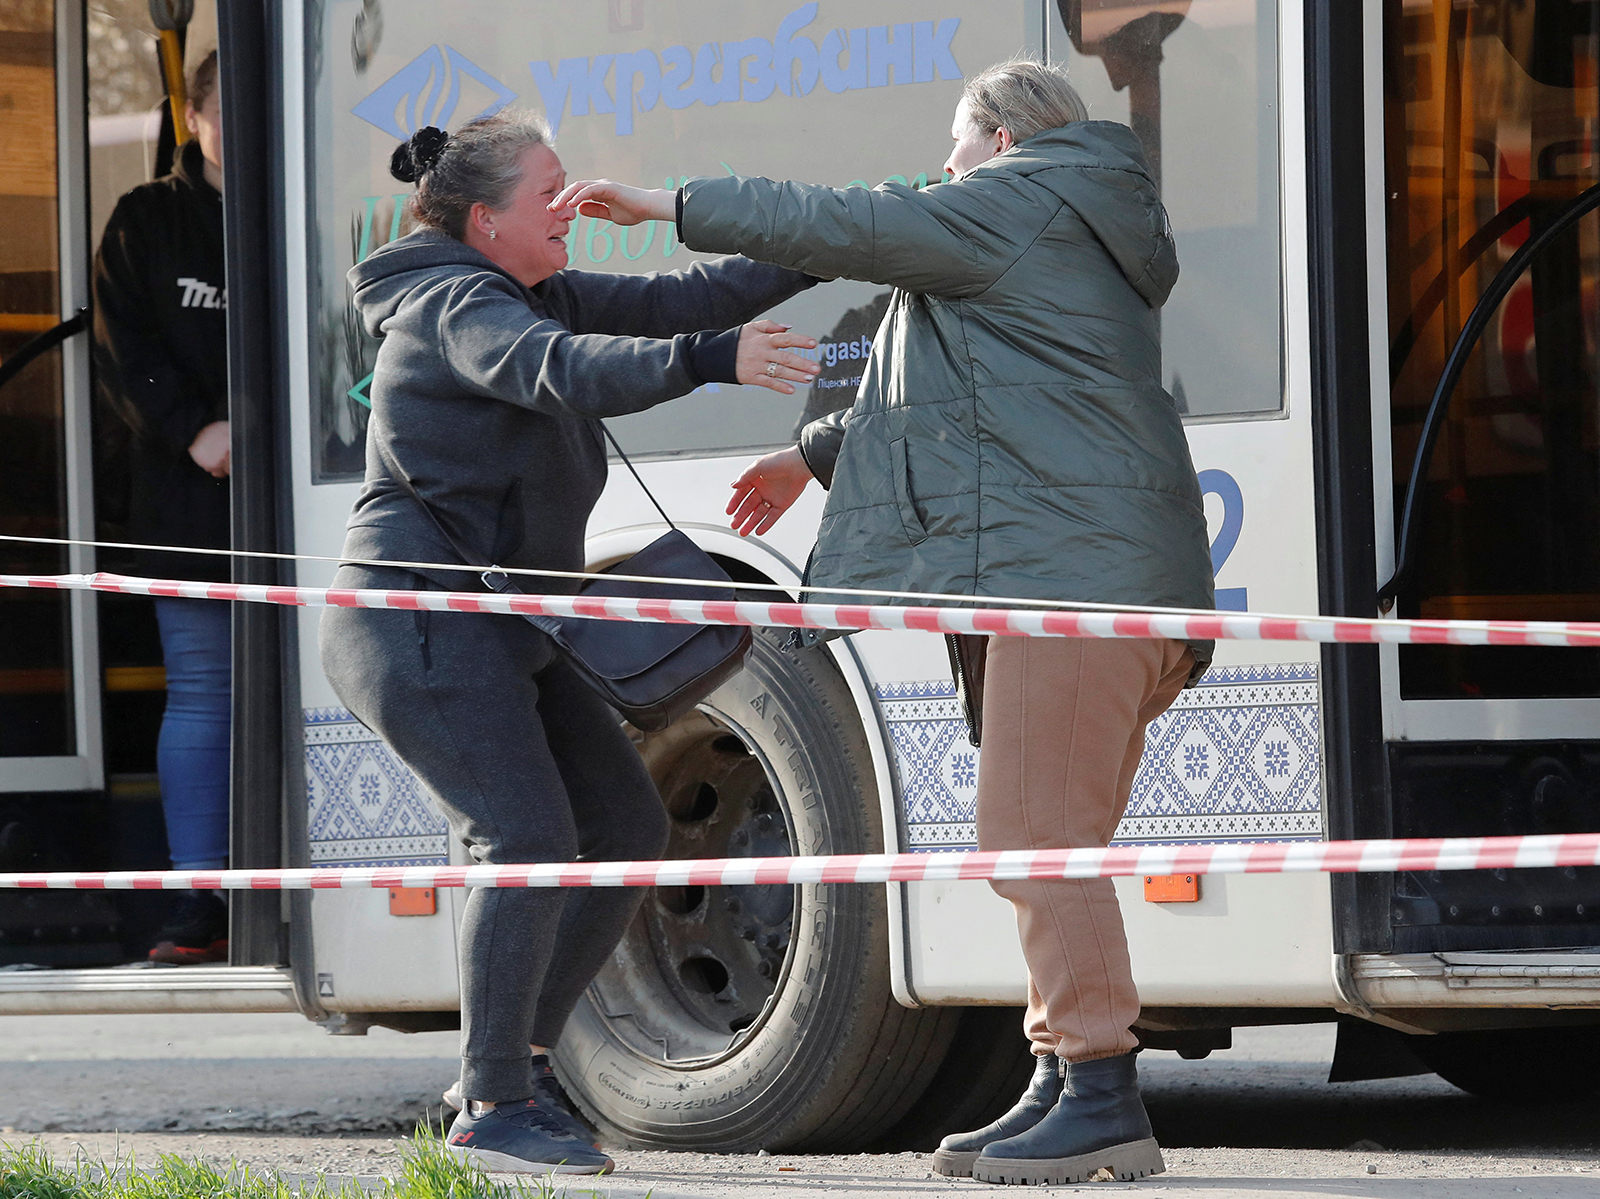 Azovstal steel plant employee Valeria (R), last name withheld, evacuated from Mariupol, hugs her sister Aleksandra as they meet at a temporary accommodation centre during Ukraine-Russia conflict in the village of Bezimenne in the Donetsk Region, Ukraine on May 1.